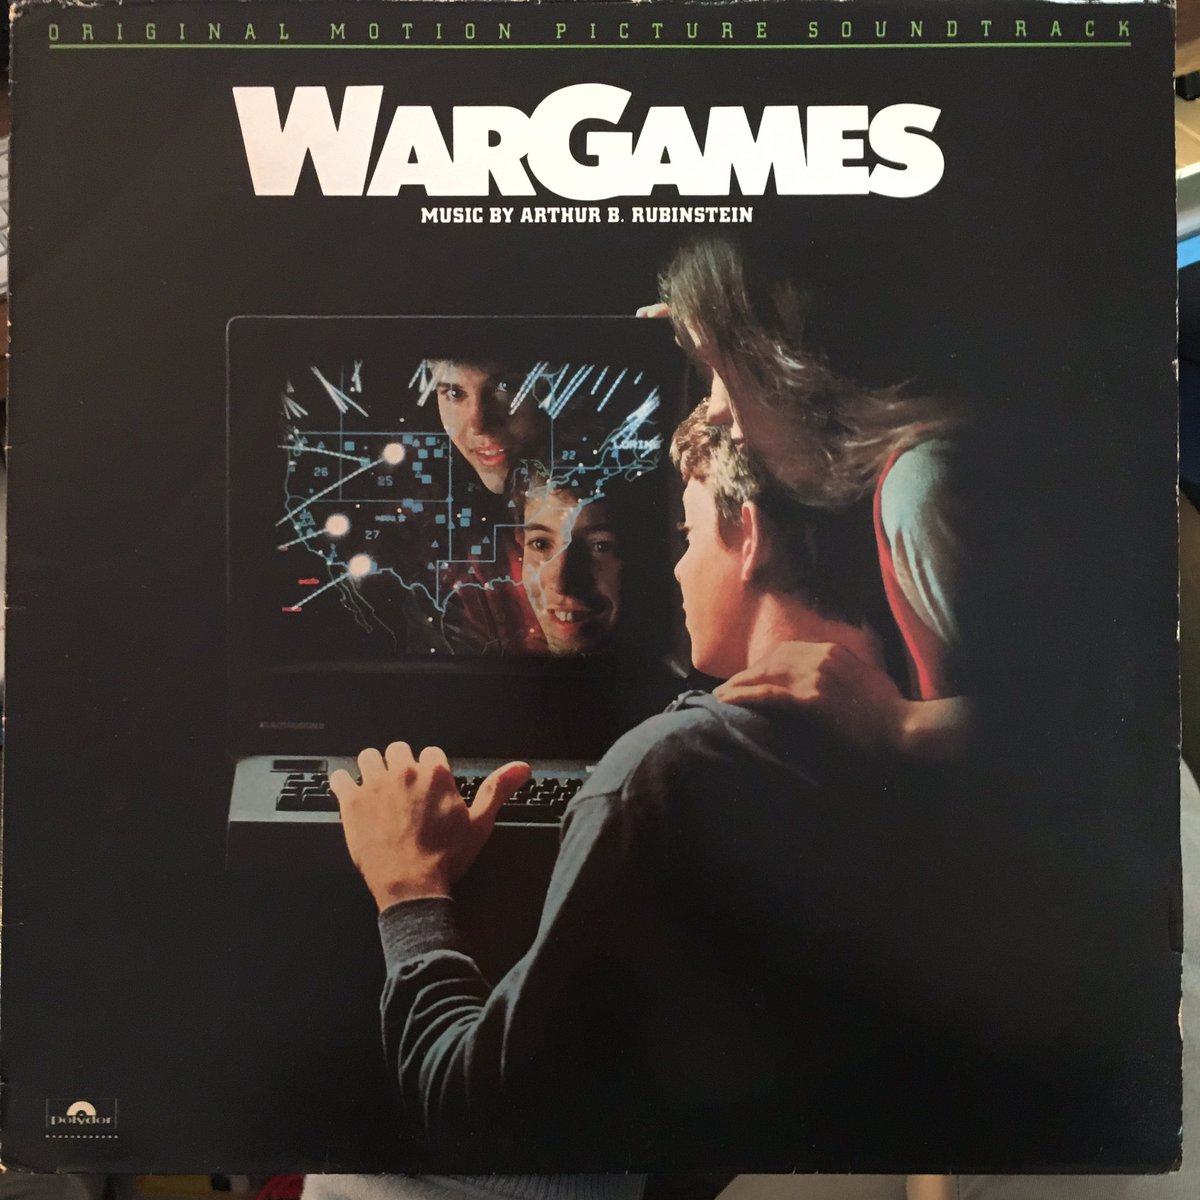 Let's have a look inside another record from my shelves...Today's isn't an obscurity as such, it's the soundtrack to WarGames, but there's a couple of skanky synth-pop tracks on there credited to a group called The Beepers.Here's "History Lesson" 